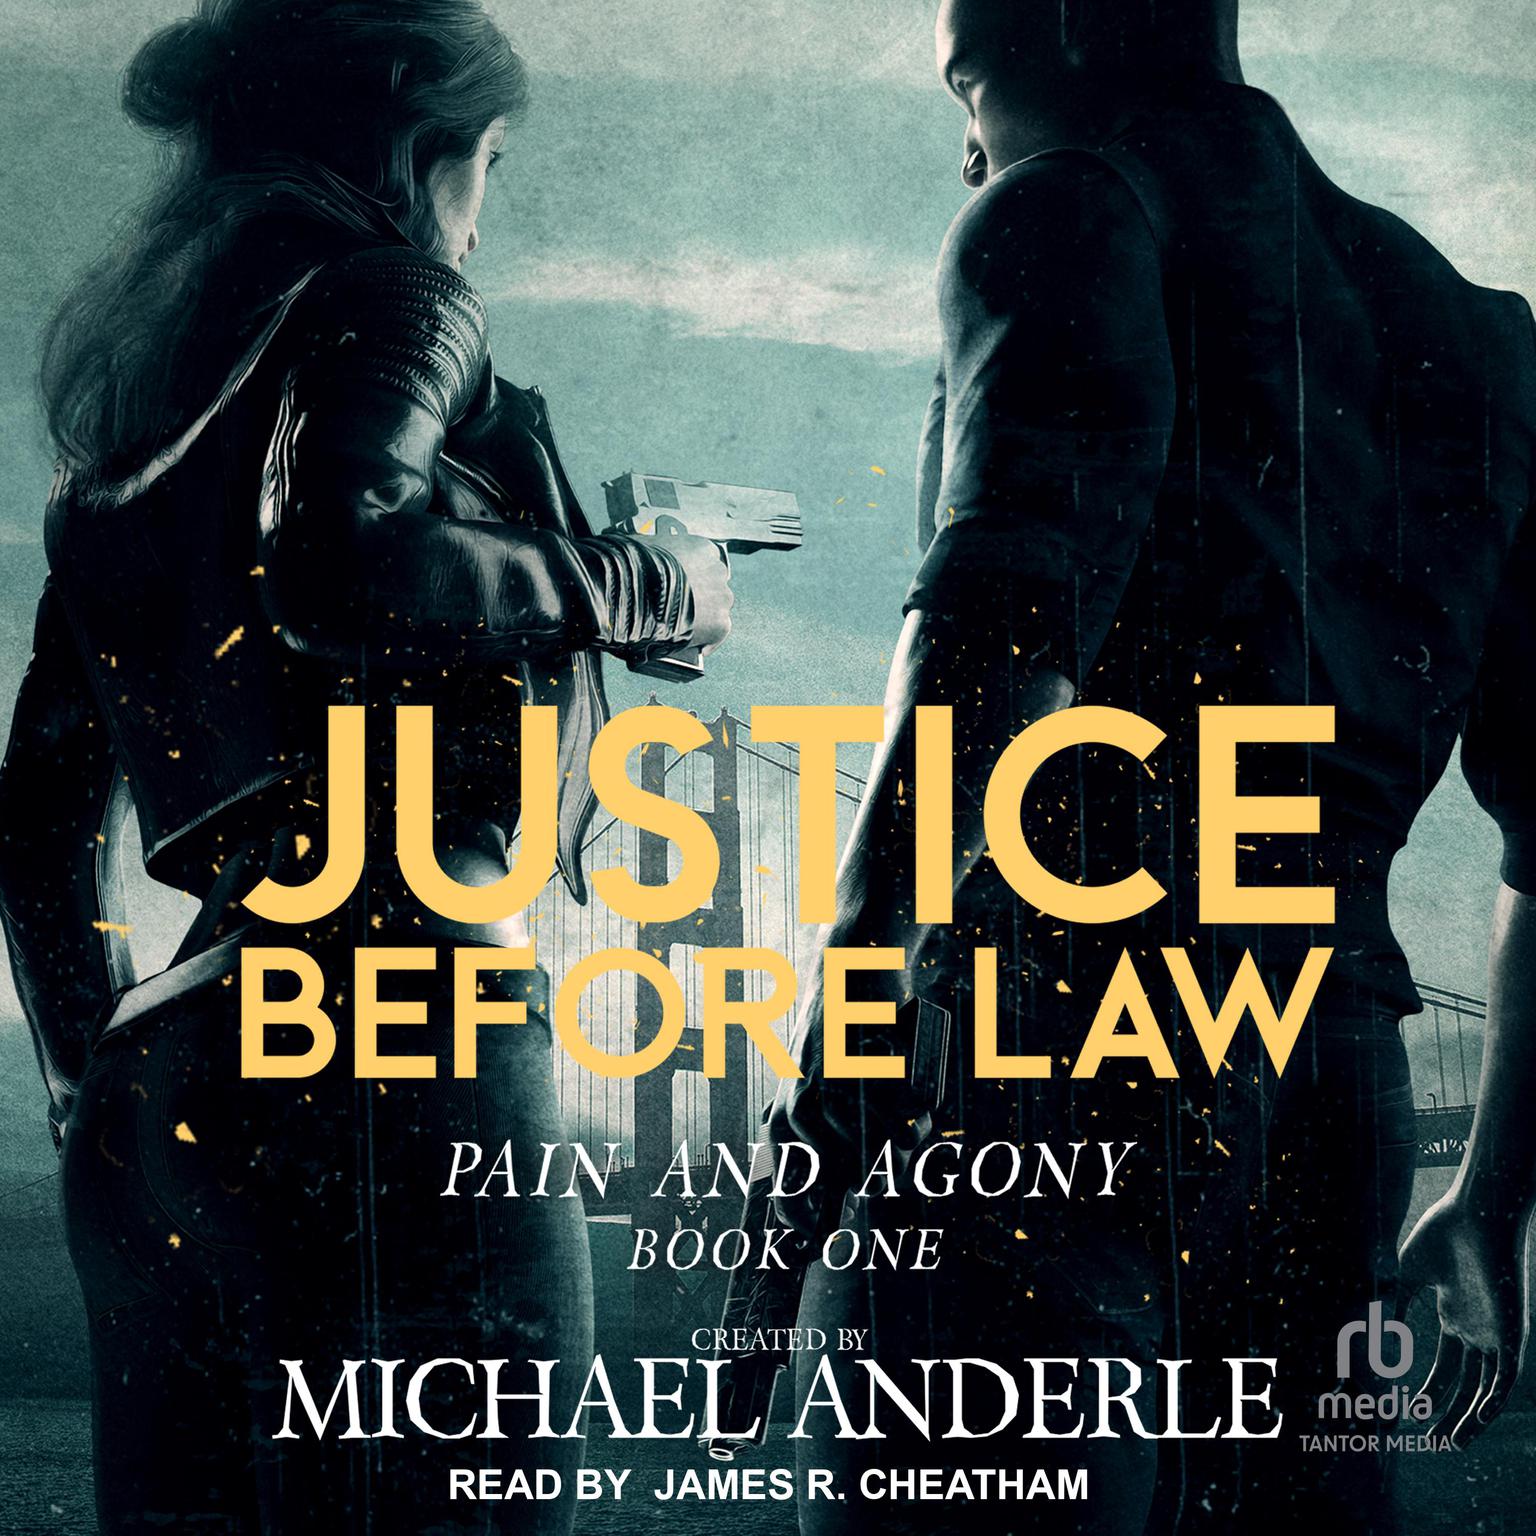 Justice Before Law Audiobook, by Michael Anderle